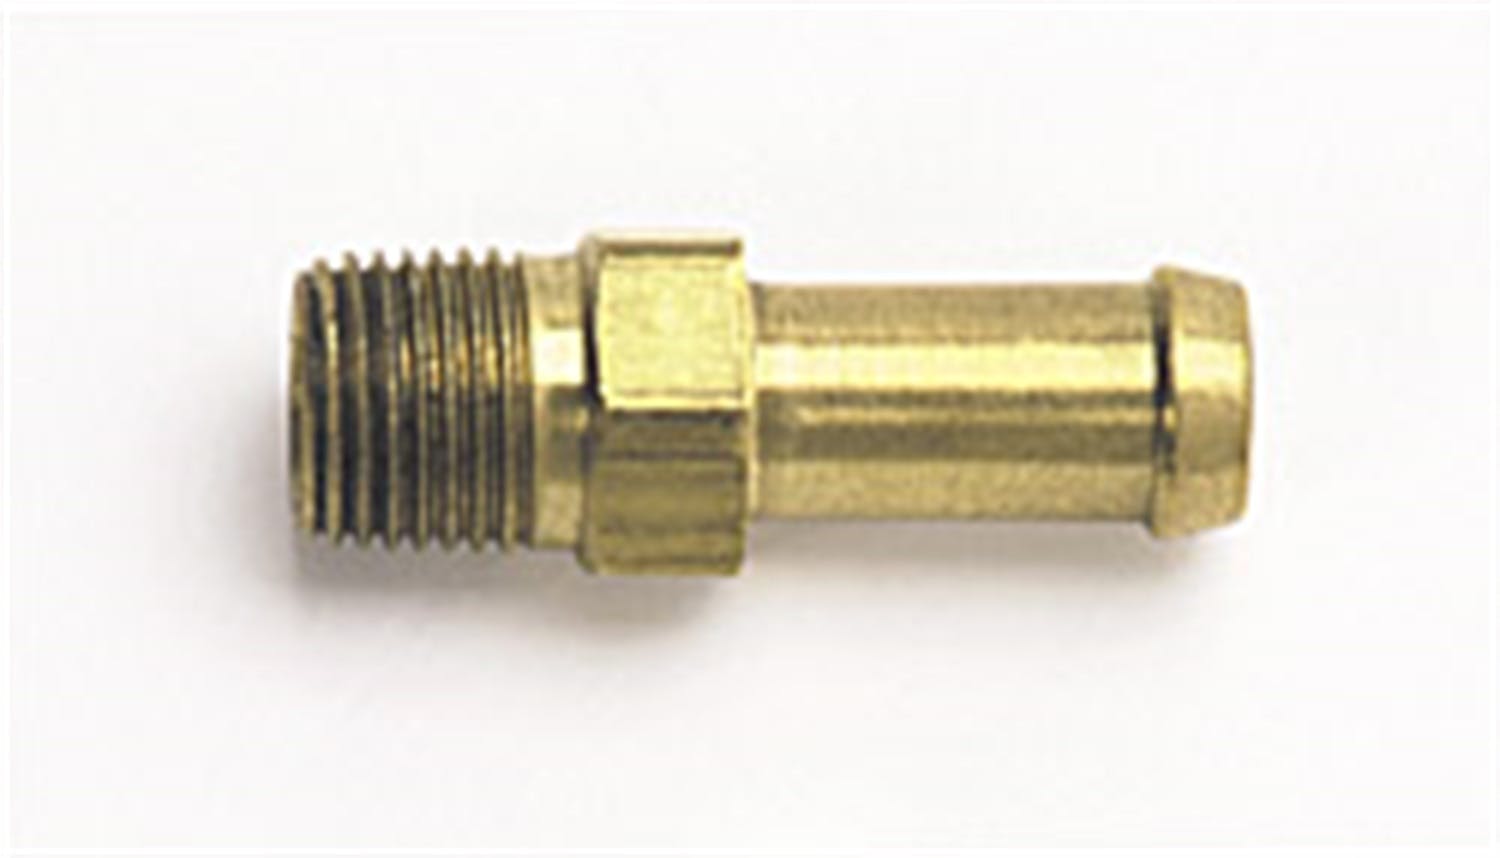 Russell 697050 1/4 NPT X 10mm Hose Single Barb Fitting